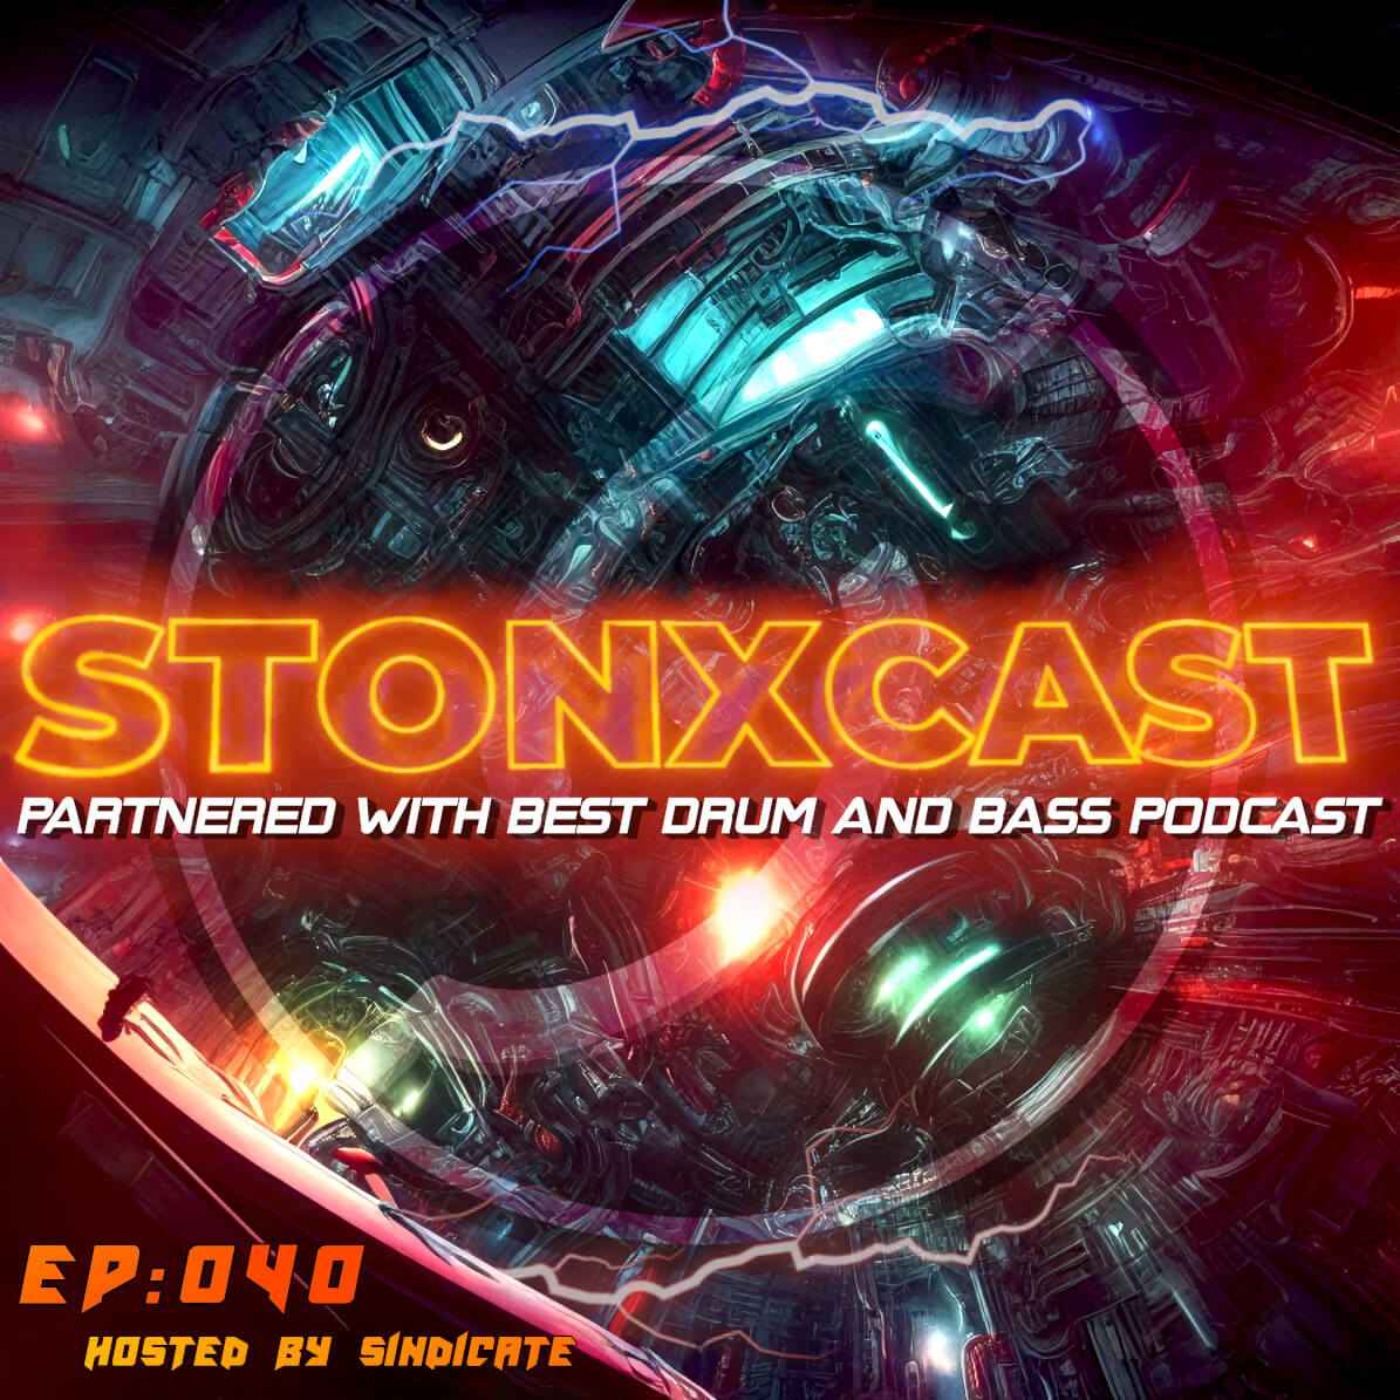 Stonxcast EP:40 - Hosted by Sindicate Artwork